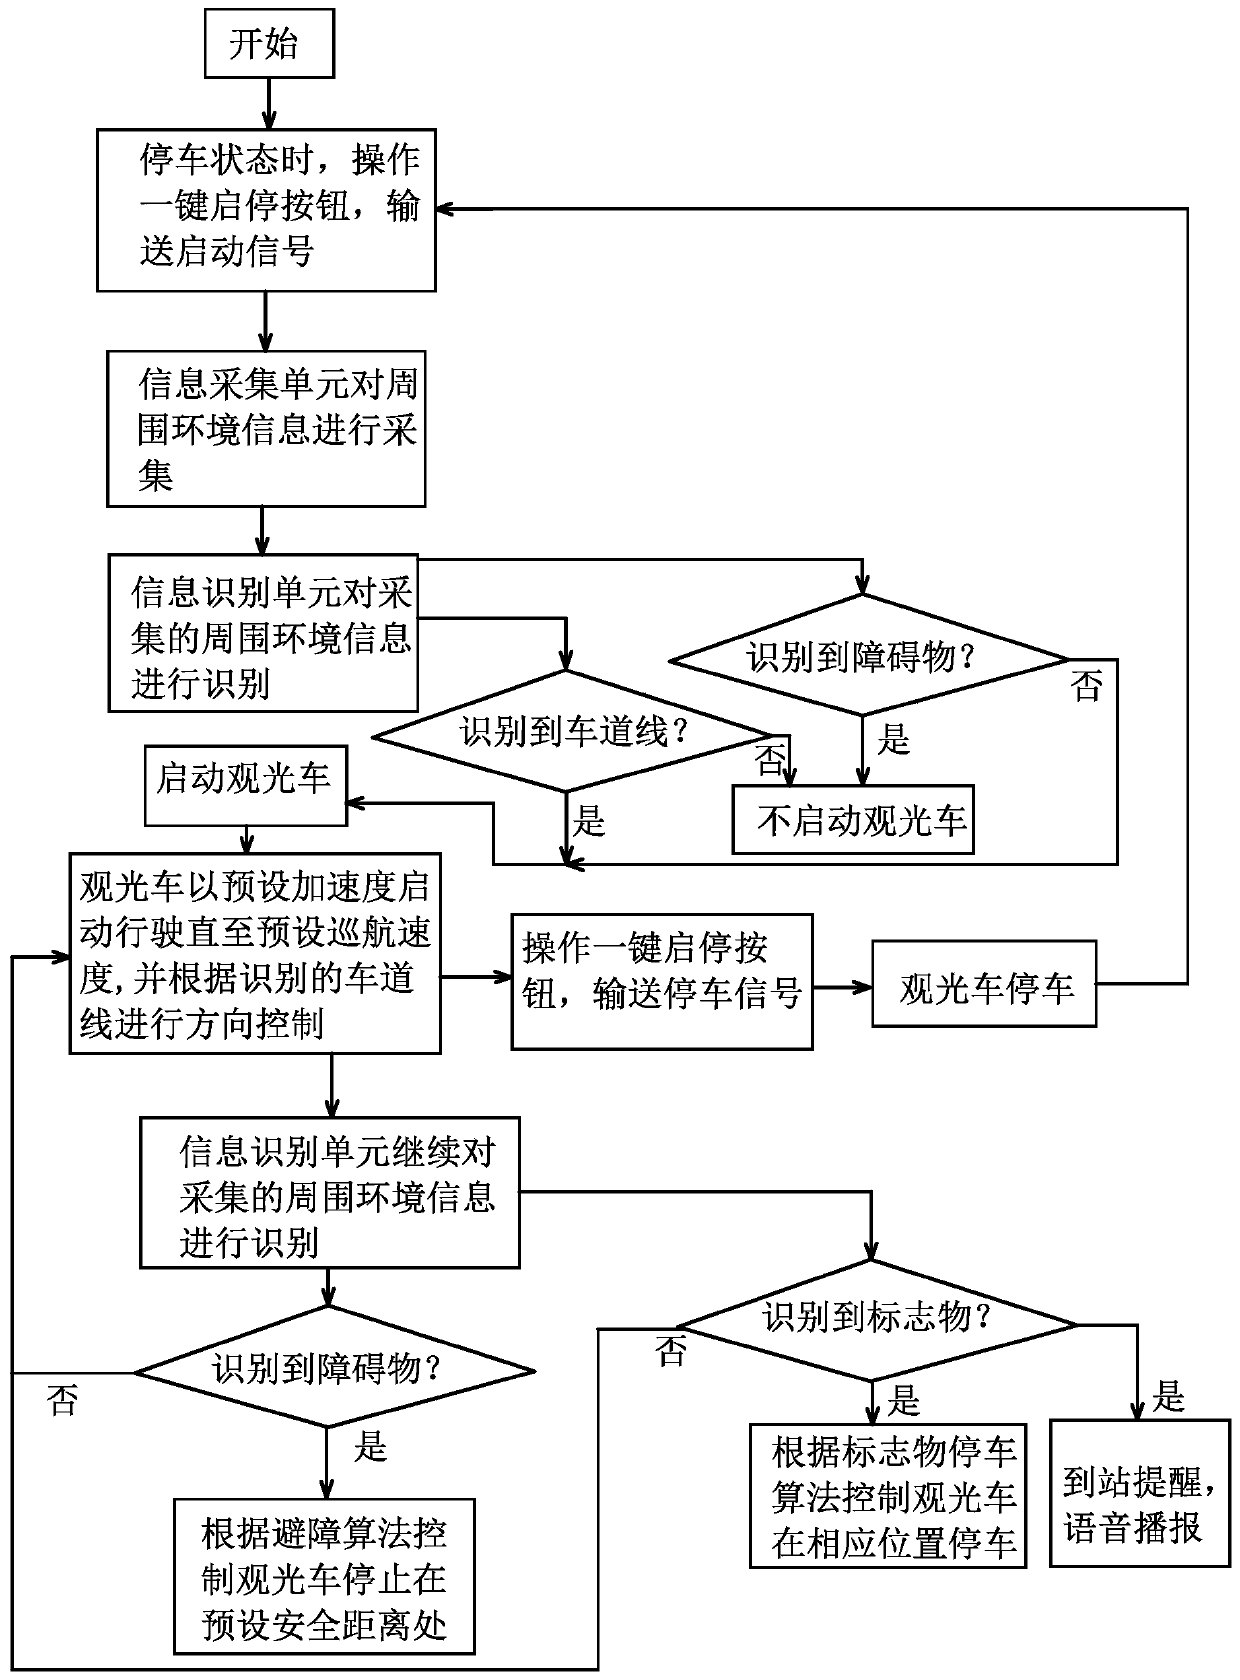 Control method and system of unmanned sightseeing vehicle